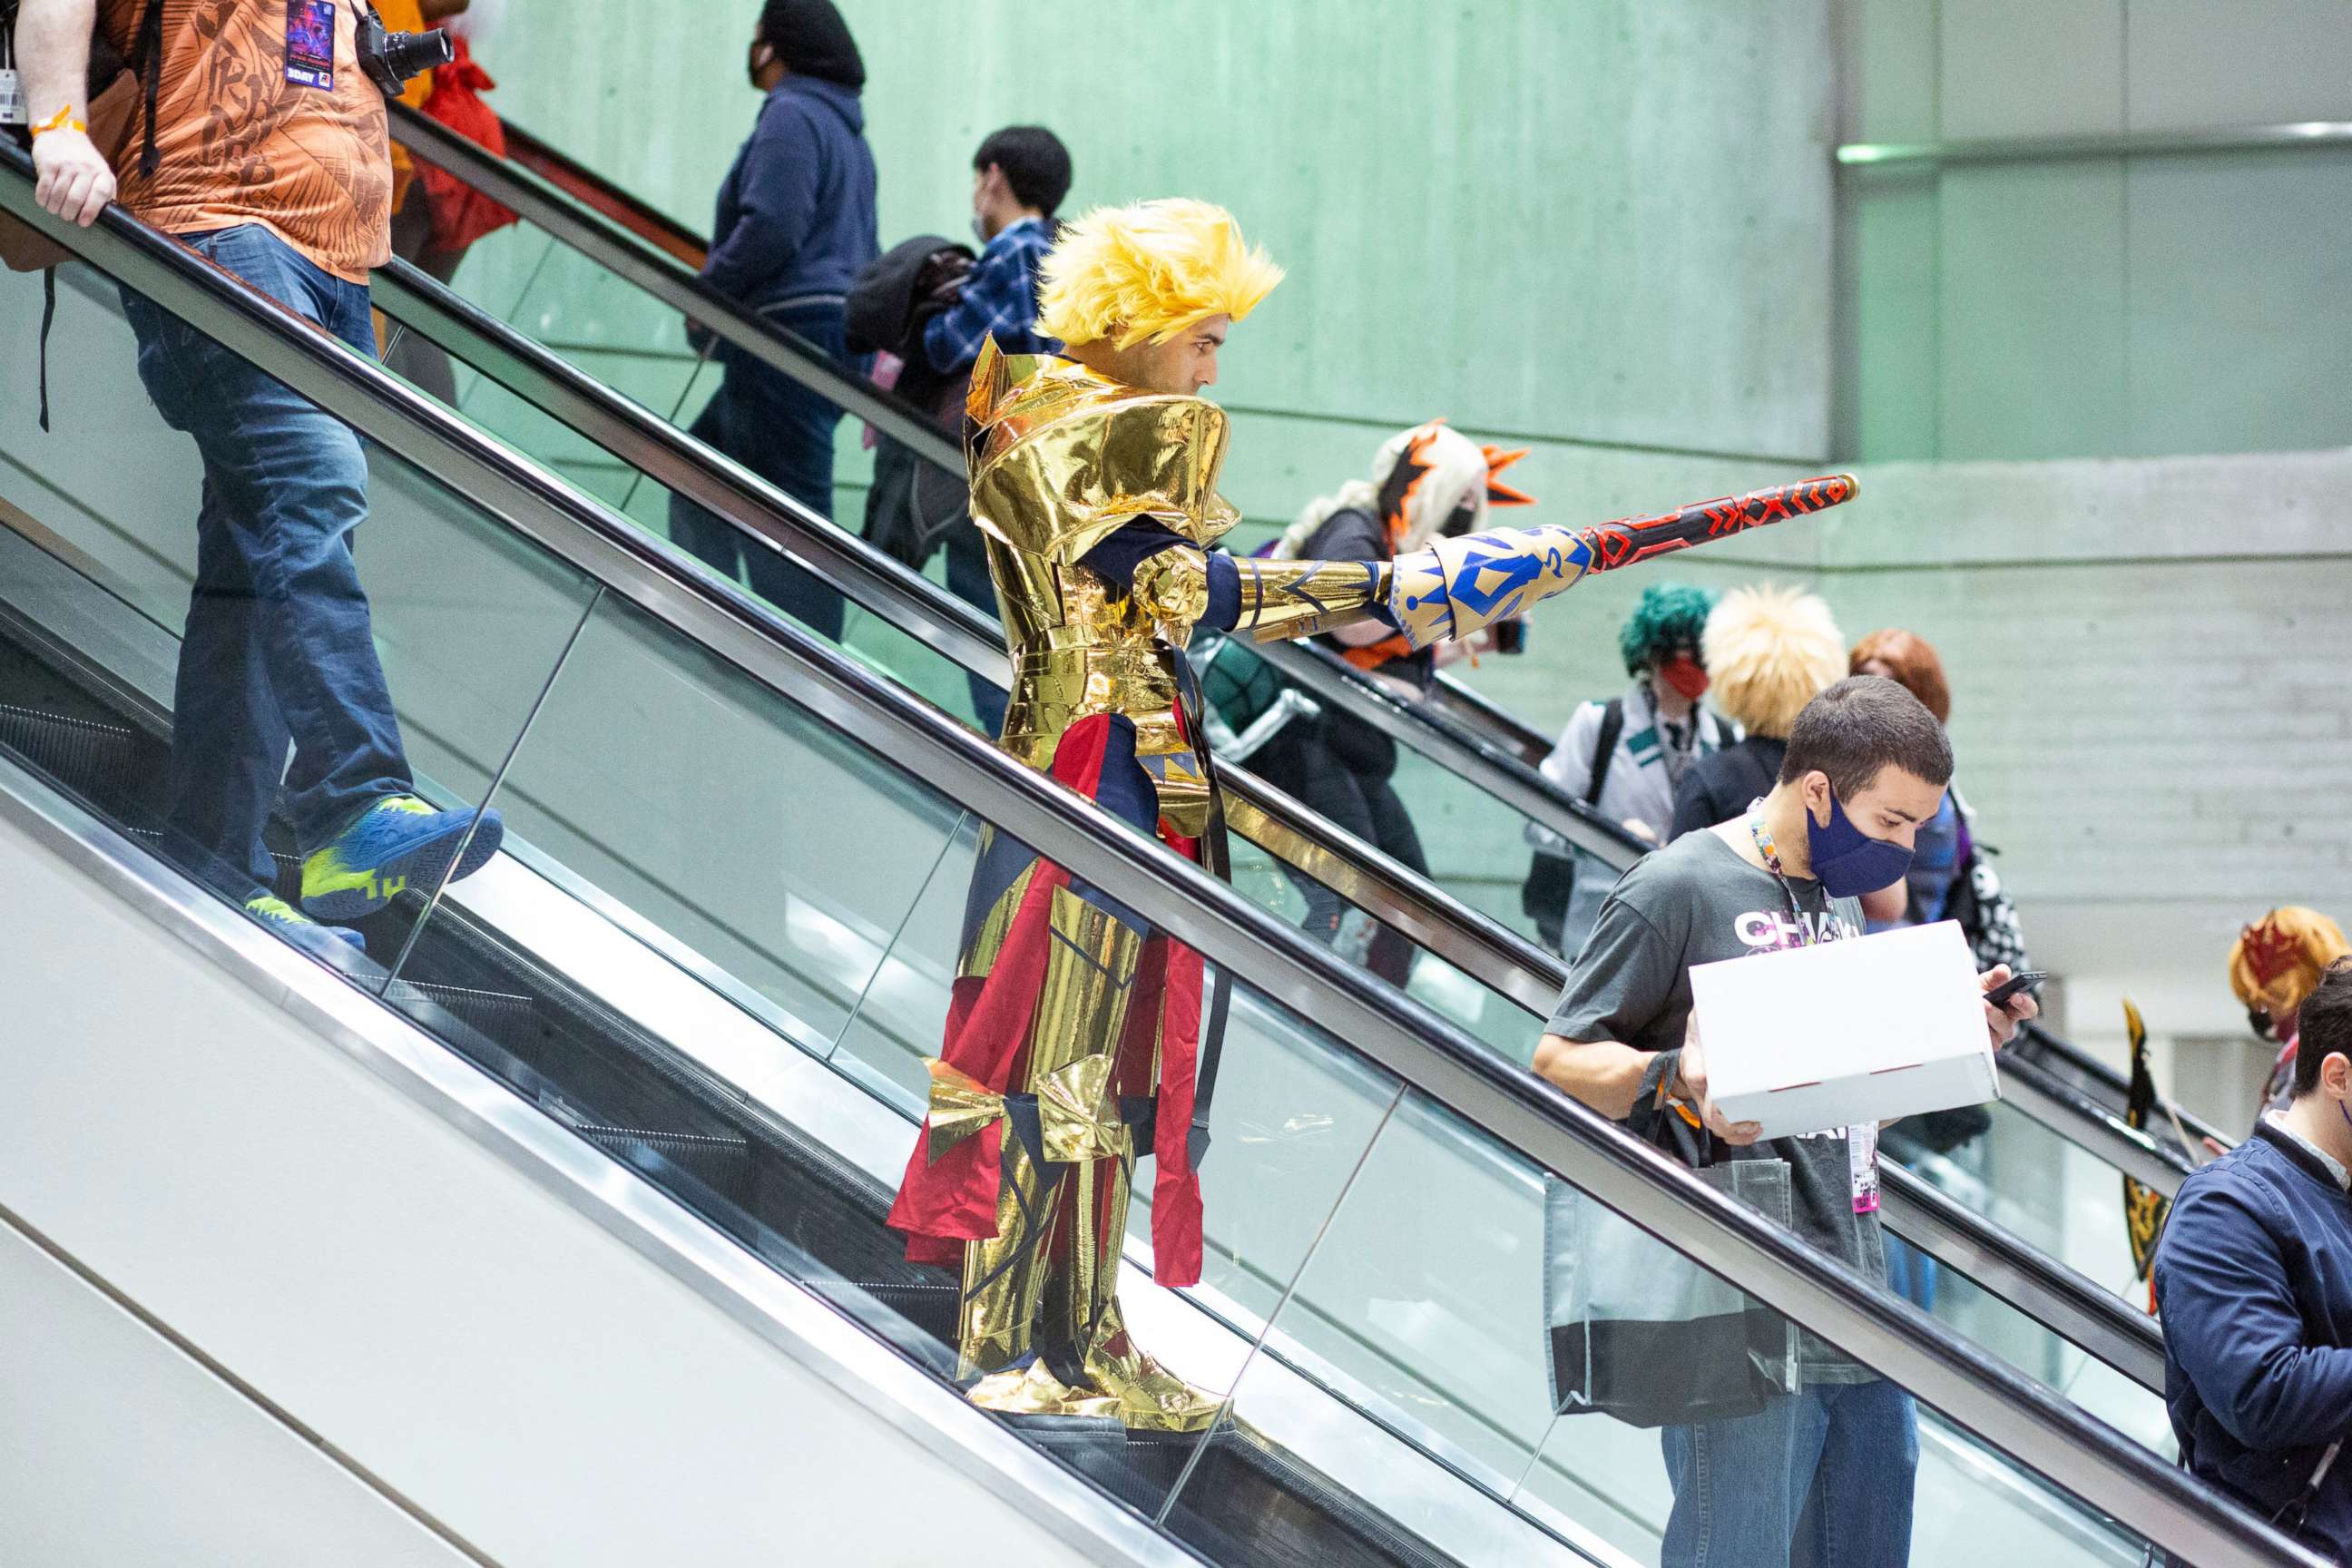 PHOTO: Costumed people attend Anime NYC at the Jacob K. Javits Convention Center in New York City on Nov. 20, 2021.